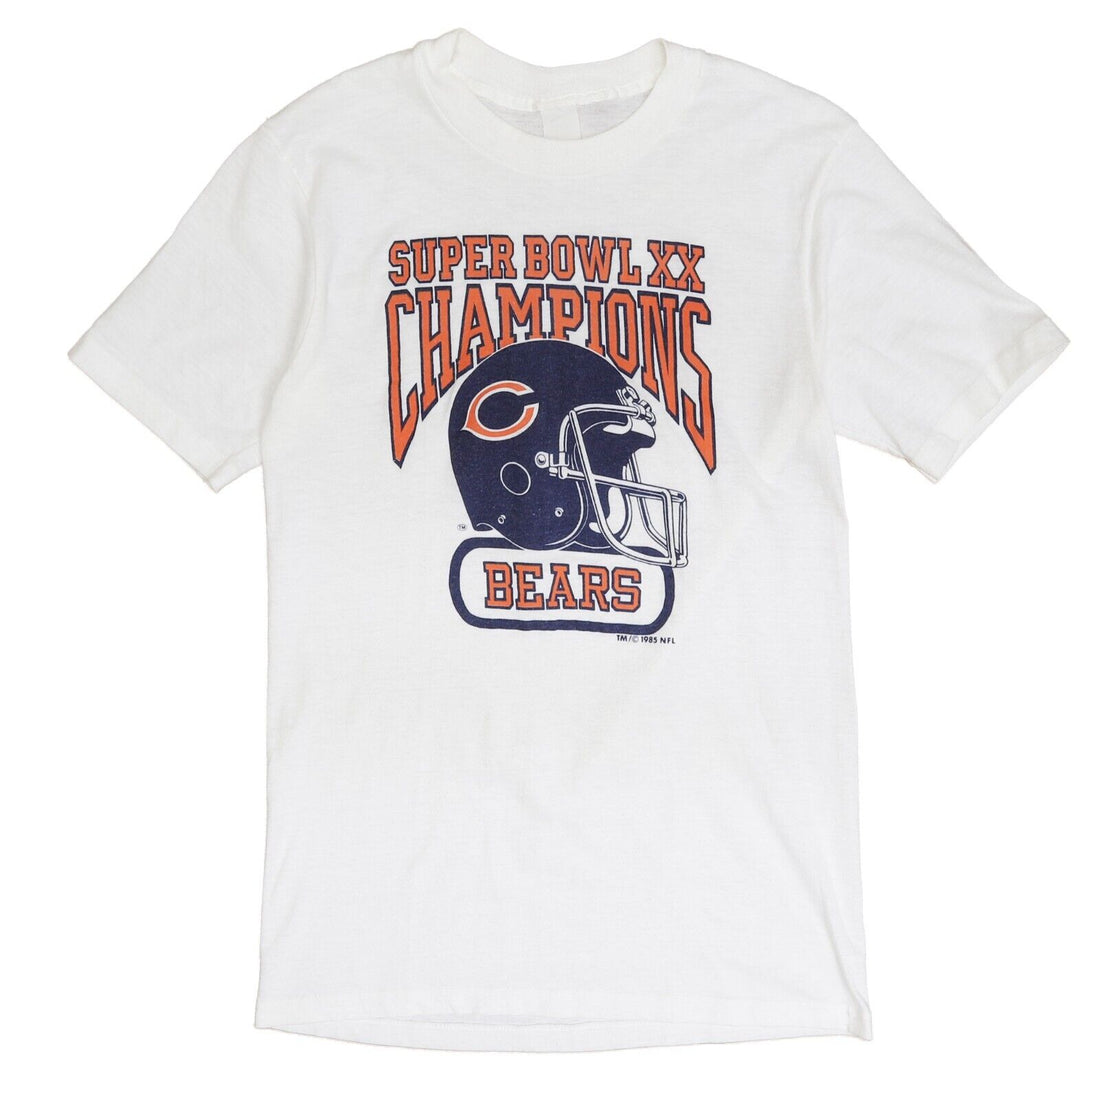 Vintage Chicago Bears Super Bowl XX Champions T-Shirt Size Small 1985 80s NFL